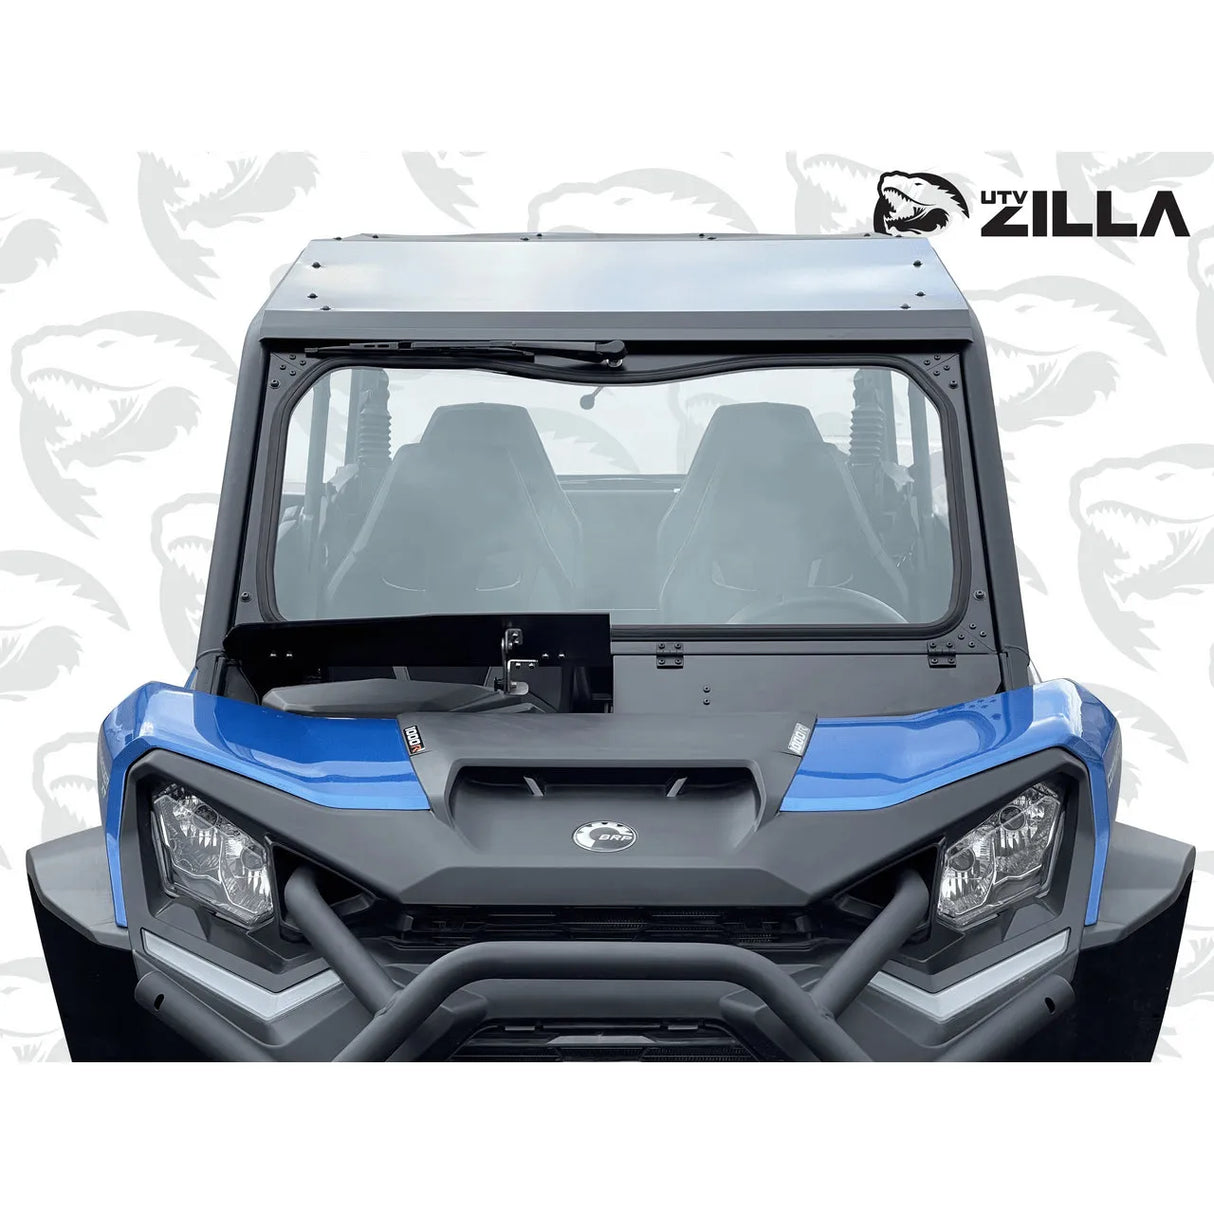 Glass Windshield for Can-Am Commander and Maverick Trail/Sport